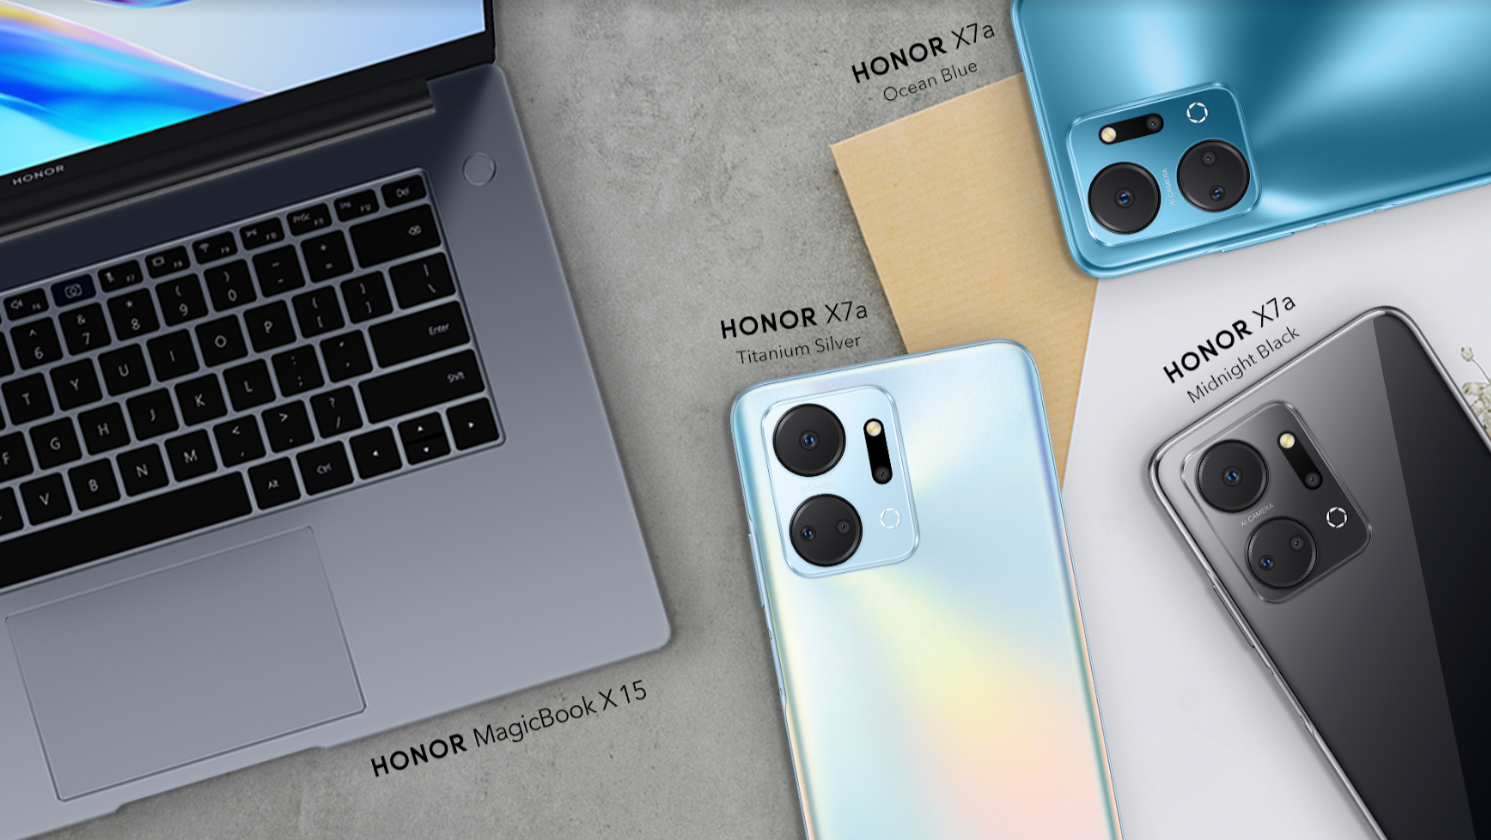 On February 22, the brand is excited to launch the HONOR X7a and the first-ever laptop product for the year, the HONOR MagicBook X Series.